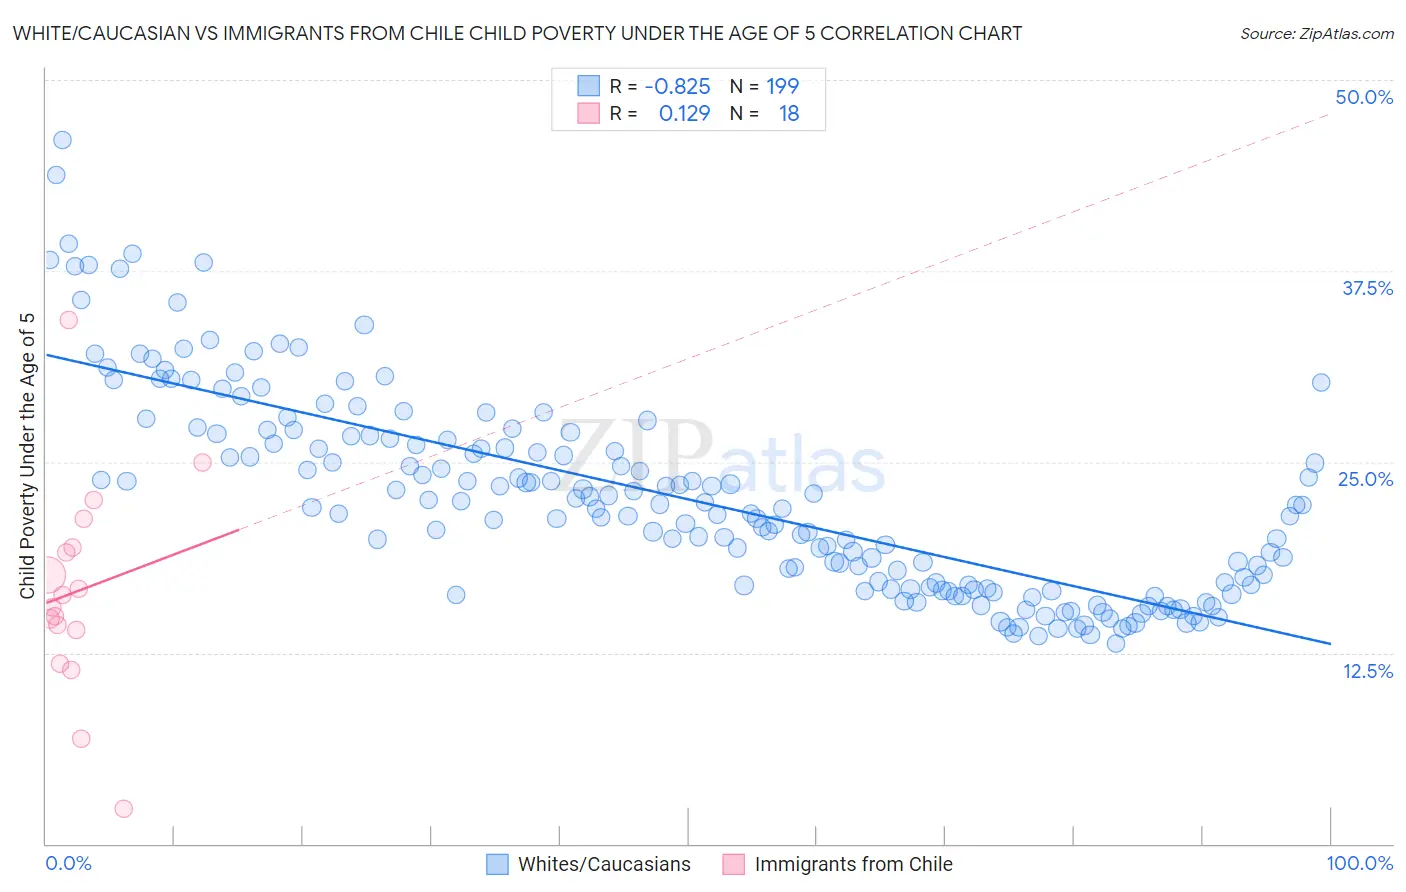 White/Caucasian vs Immigrants from Chile Child Poverty Under the Age of 5